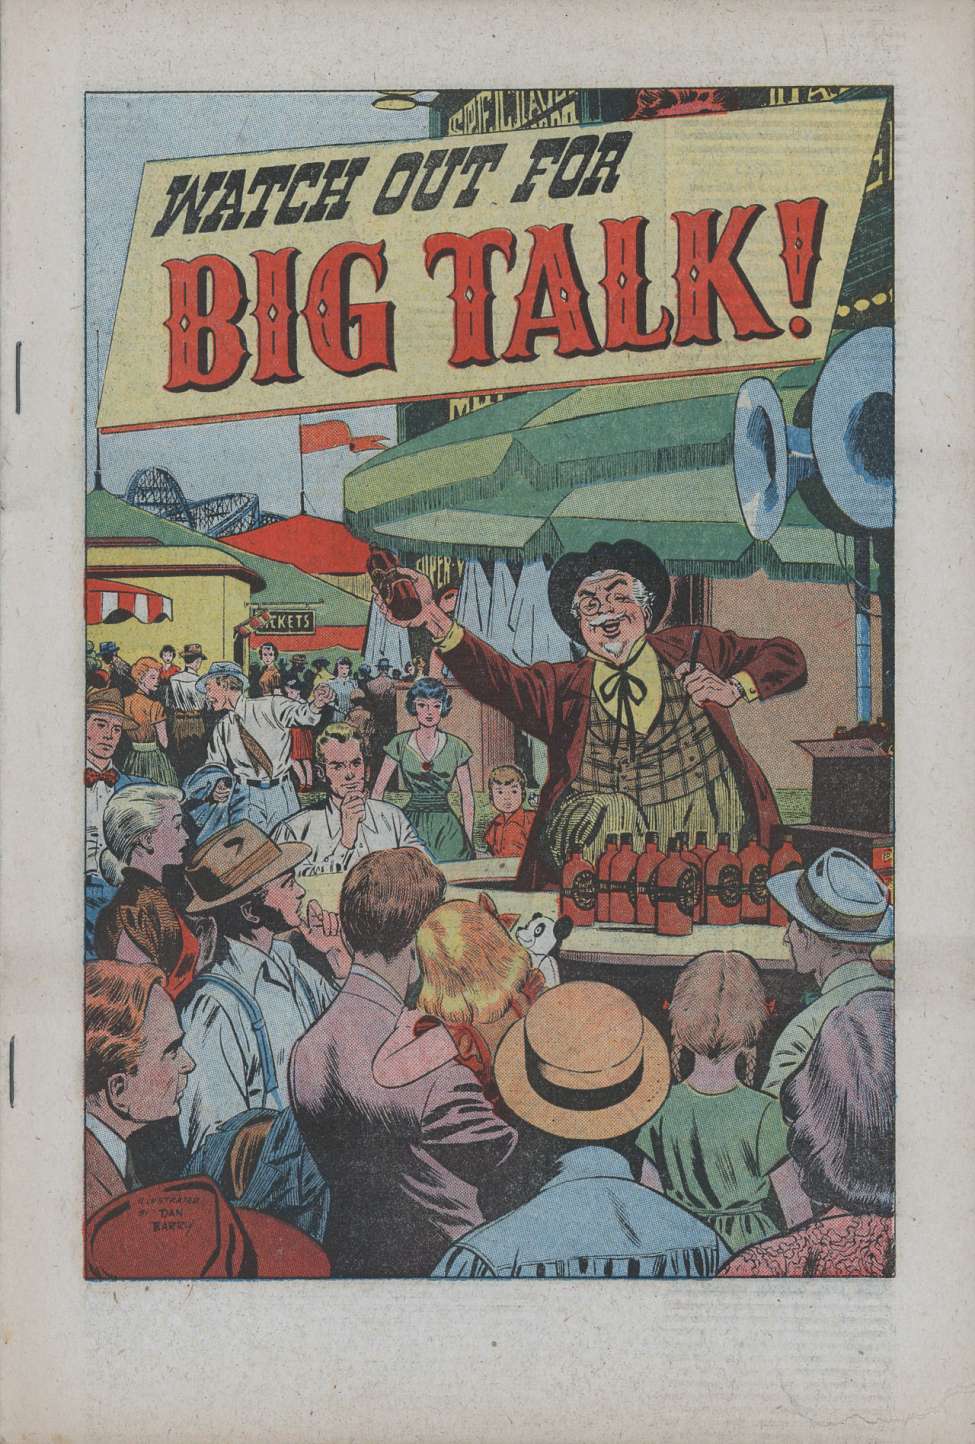 Comic Book Cover For Watch Out For Big Talk